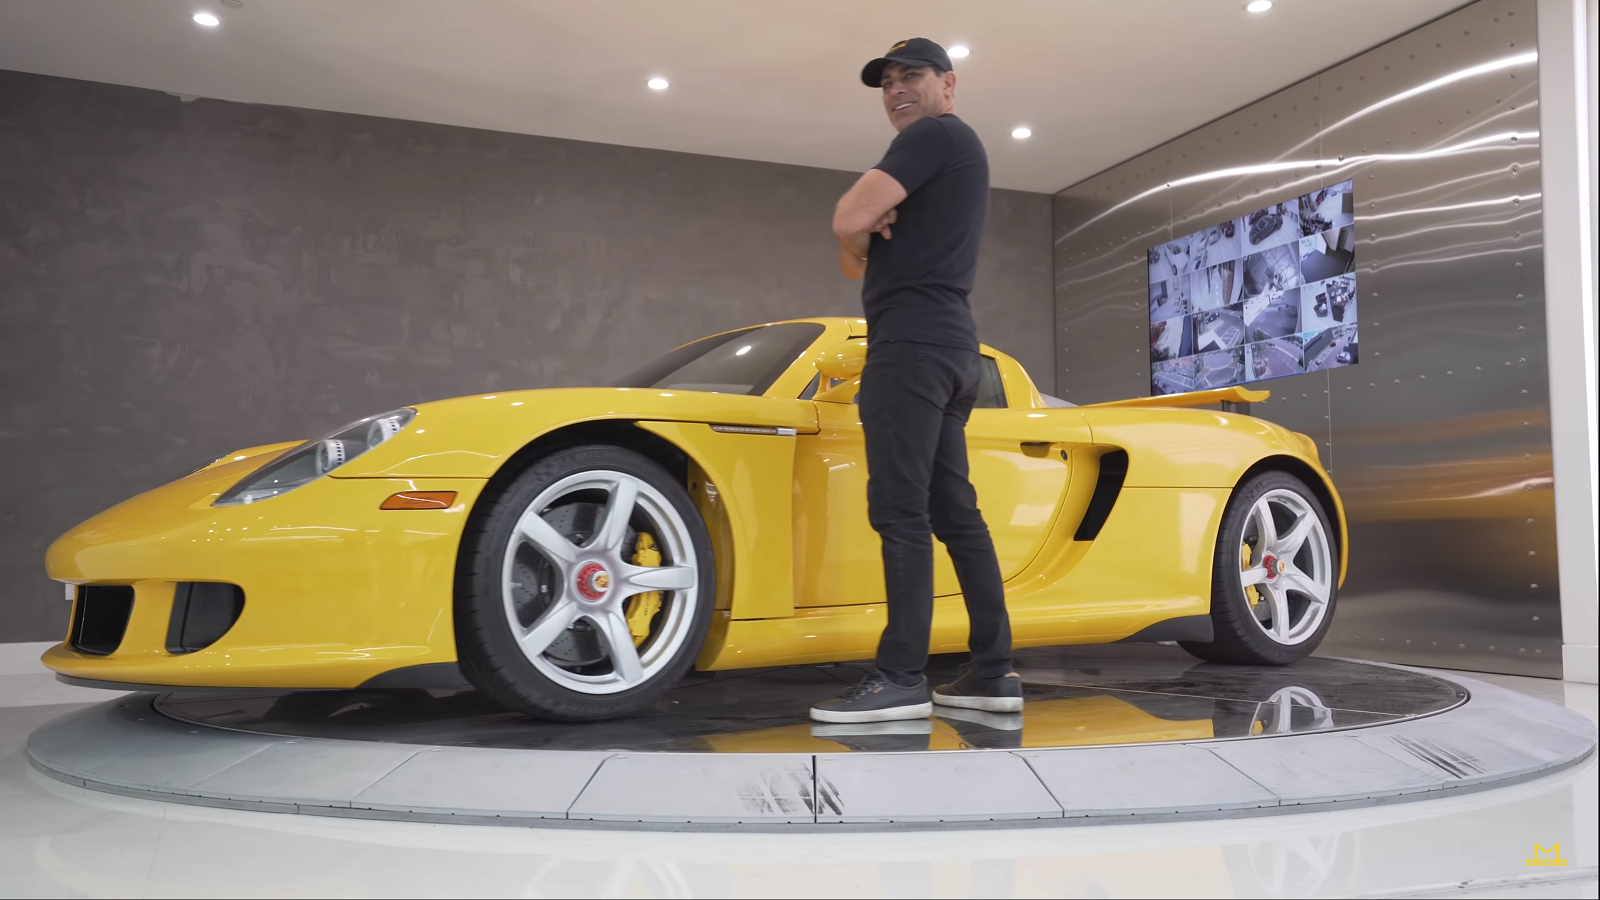 Carrera GT Owner Names 10 Things He Hates About It | Rennlist